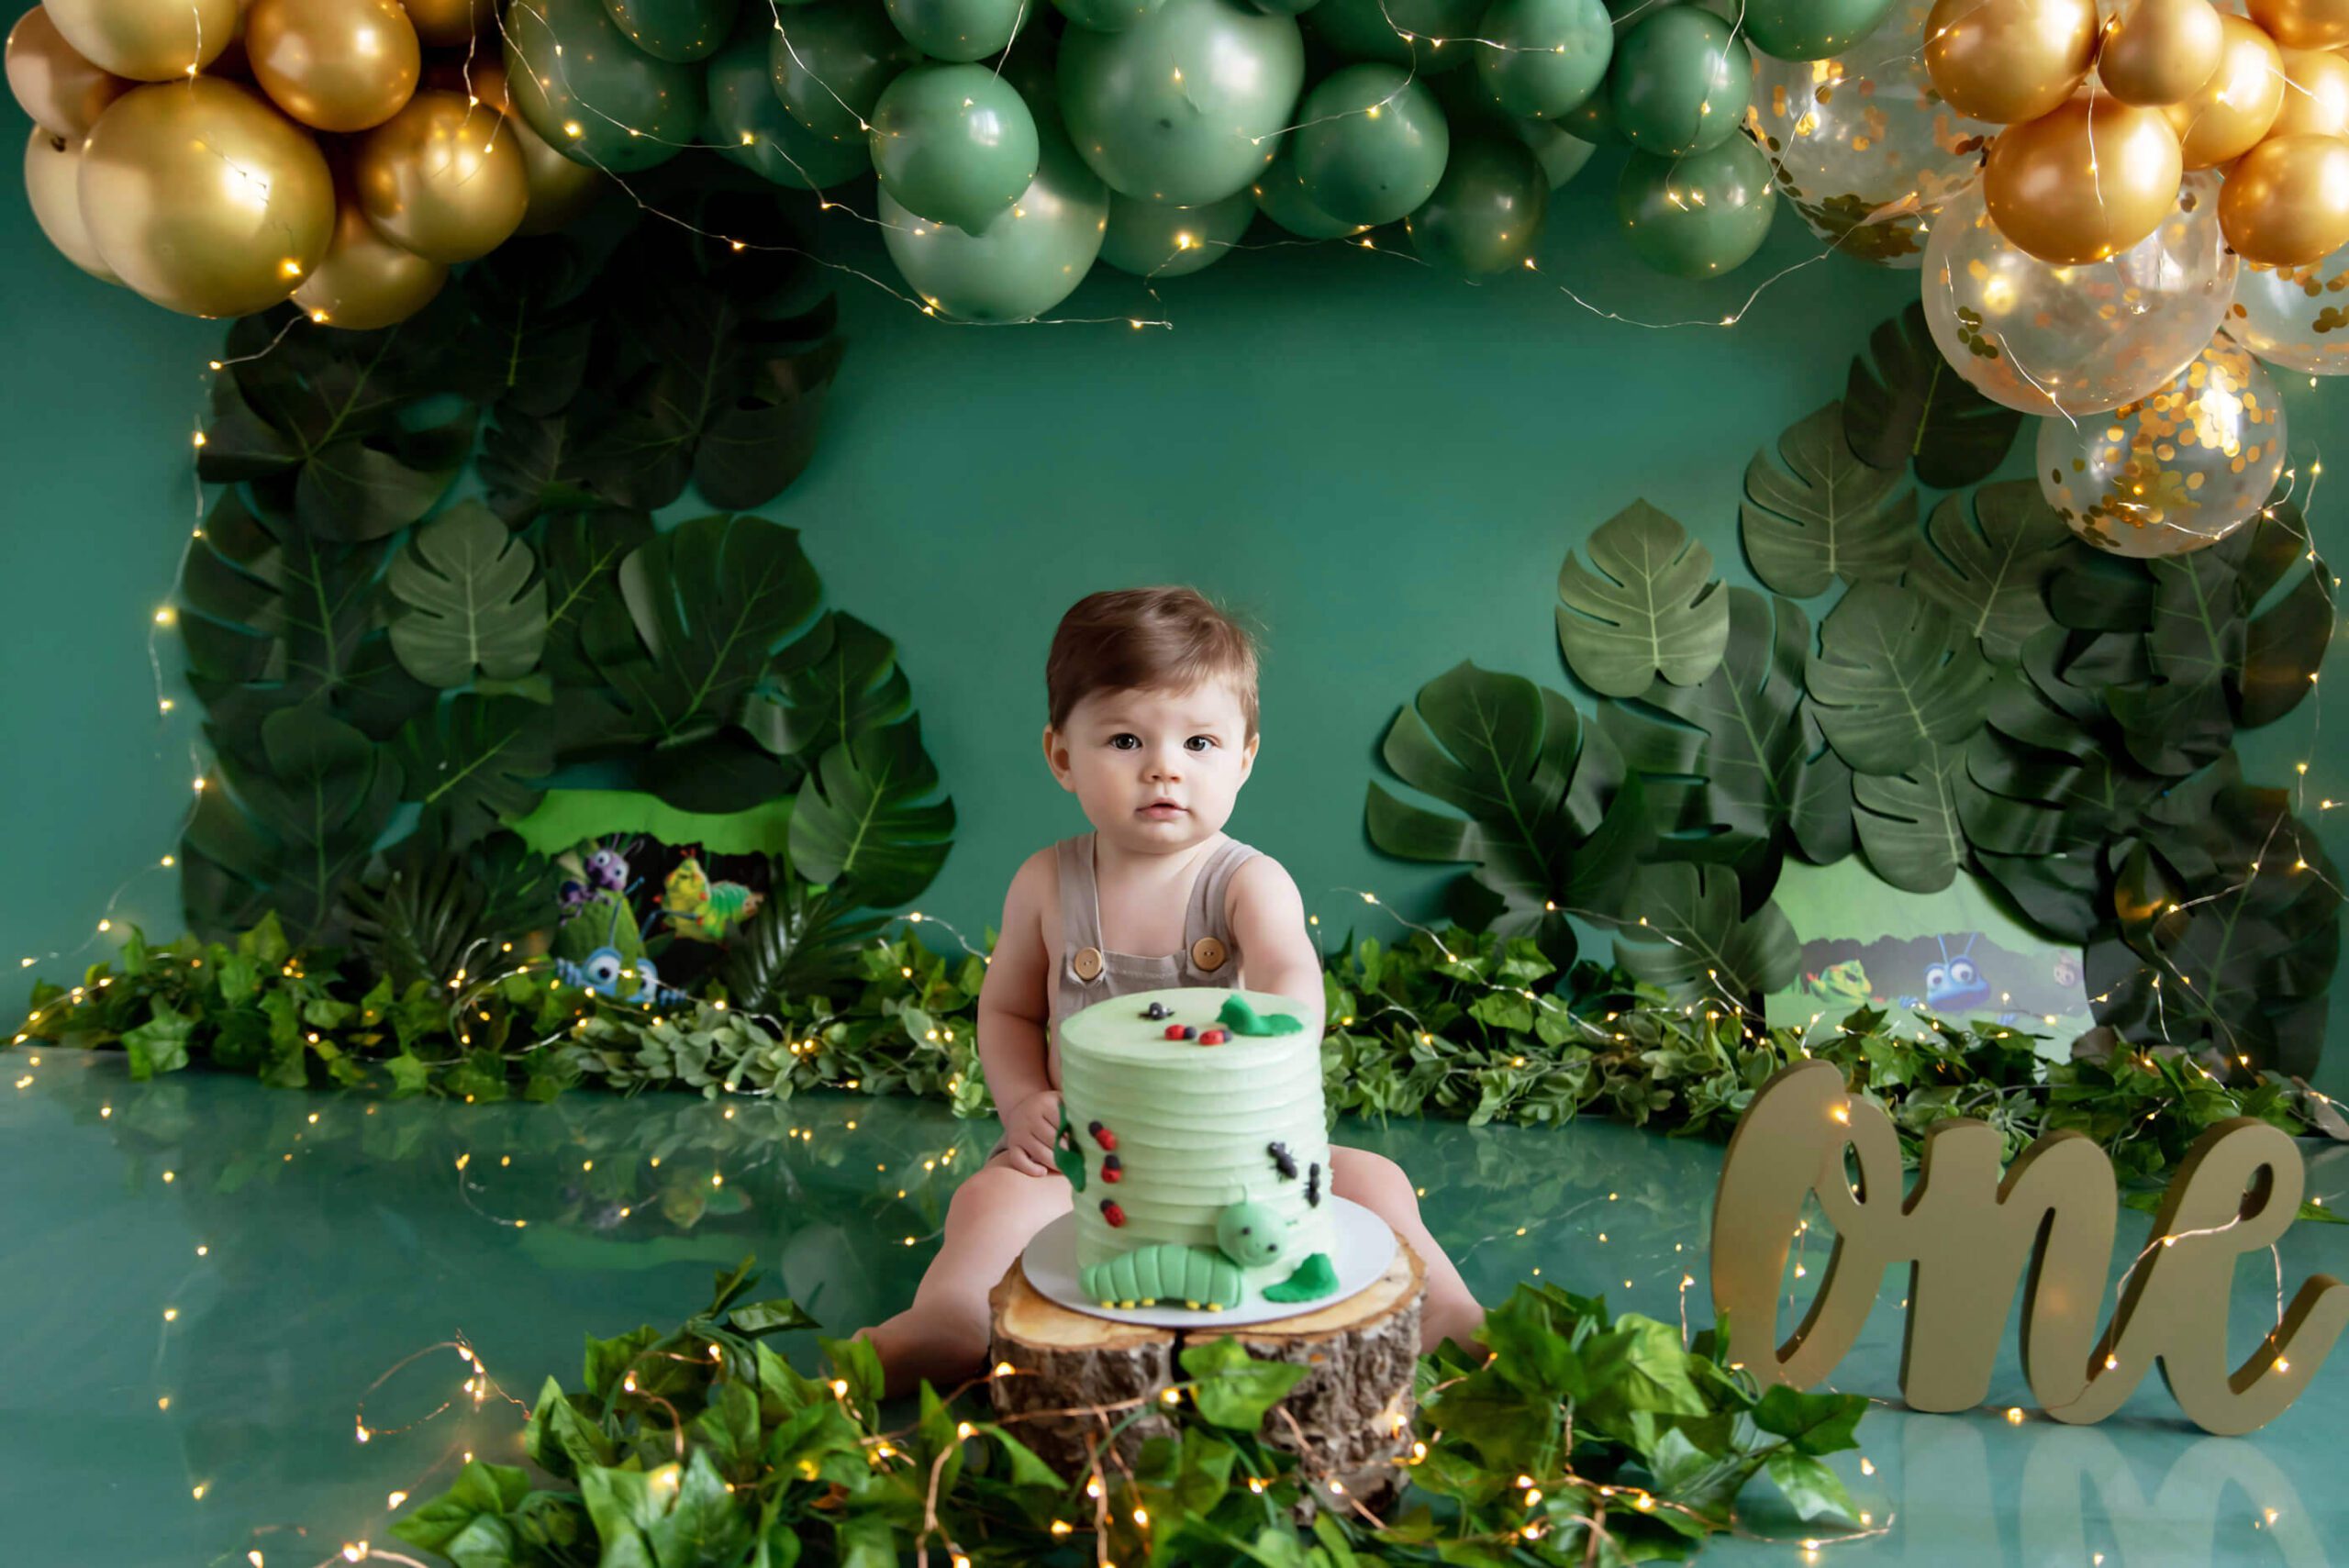 Its a Bug's Life for this love bug at his cake smash photo session